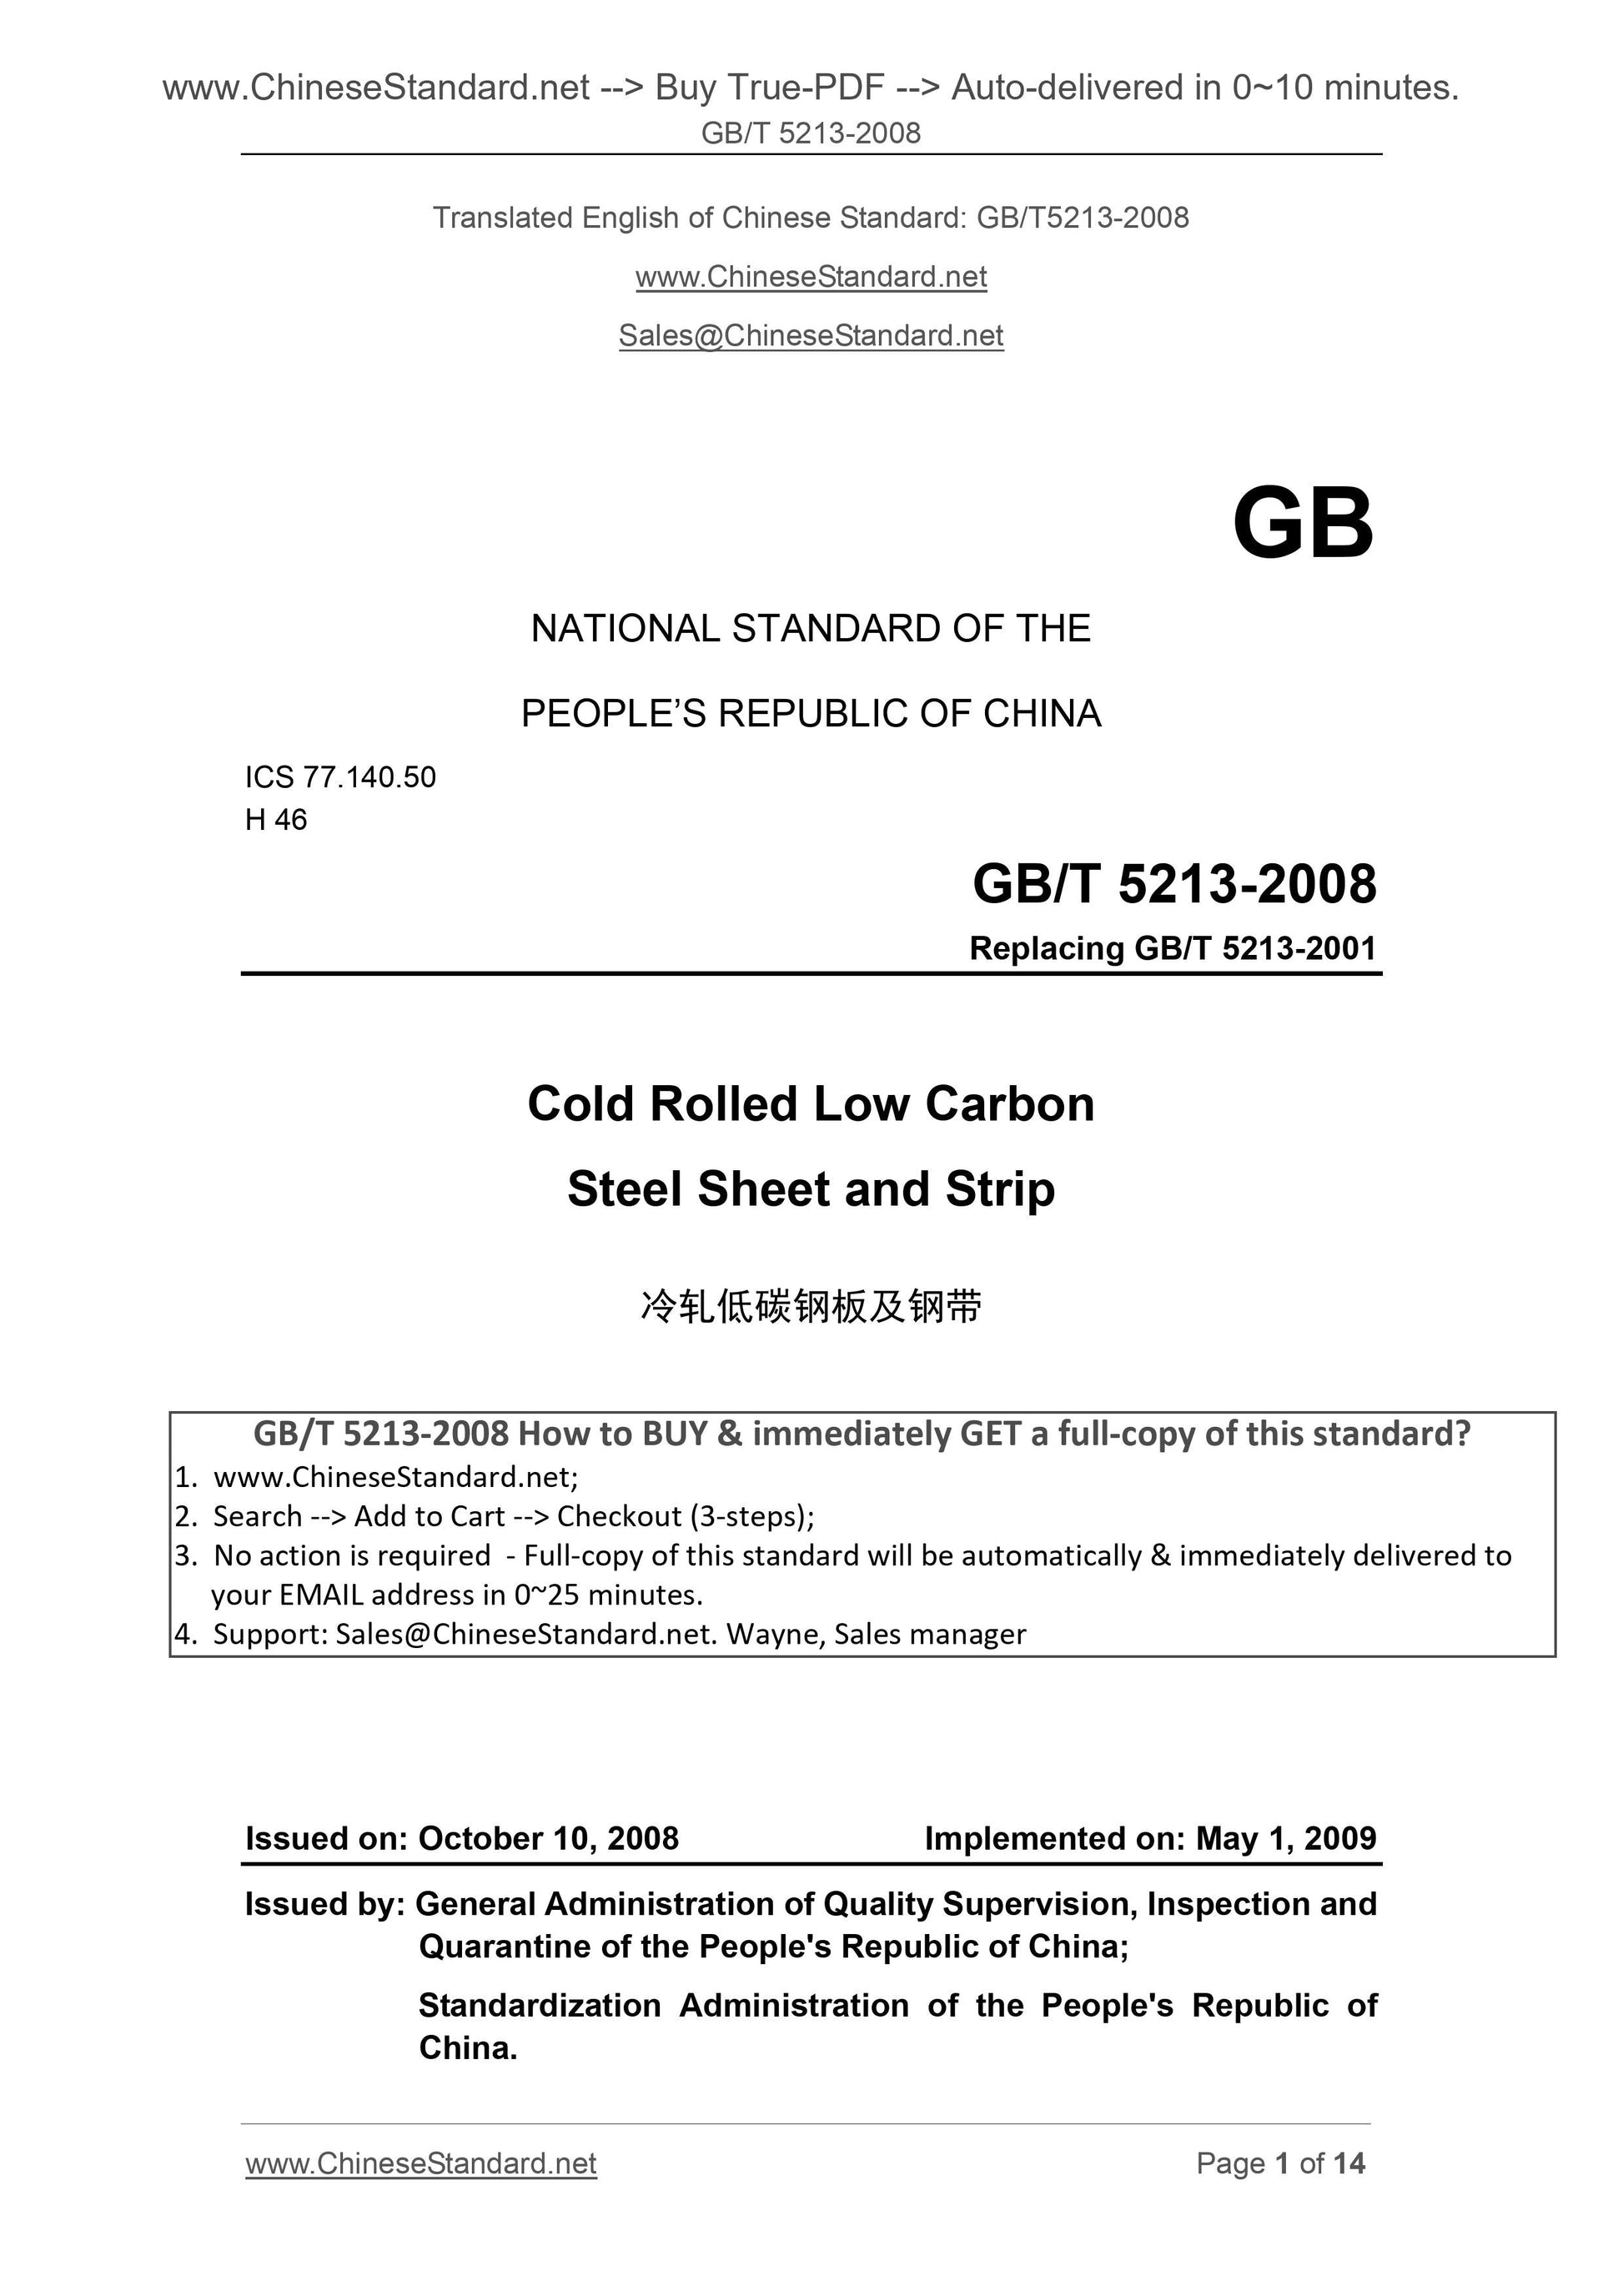 GB/T 5213-2008 Page 1